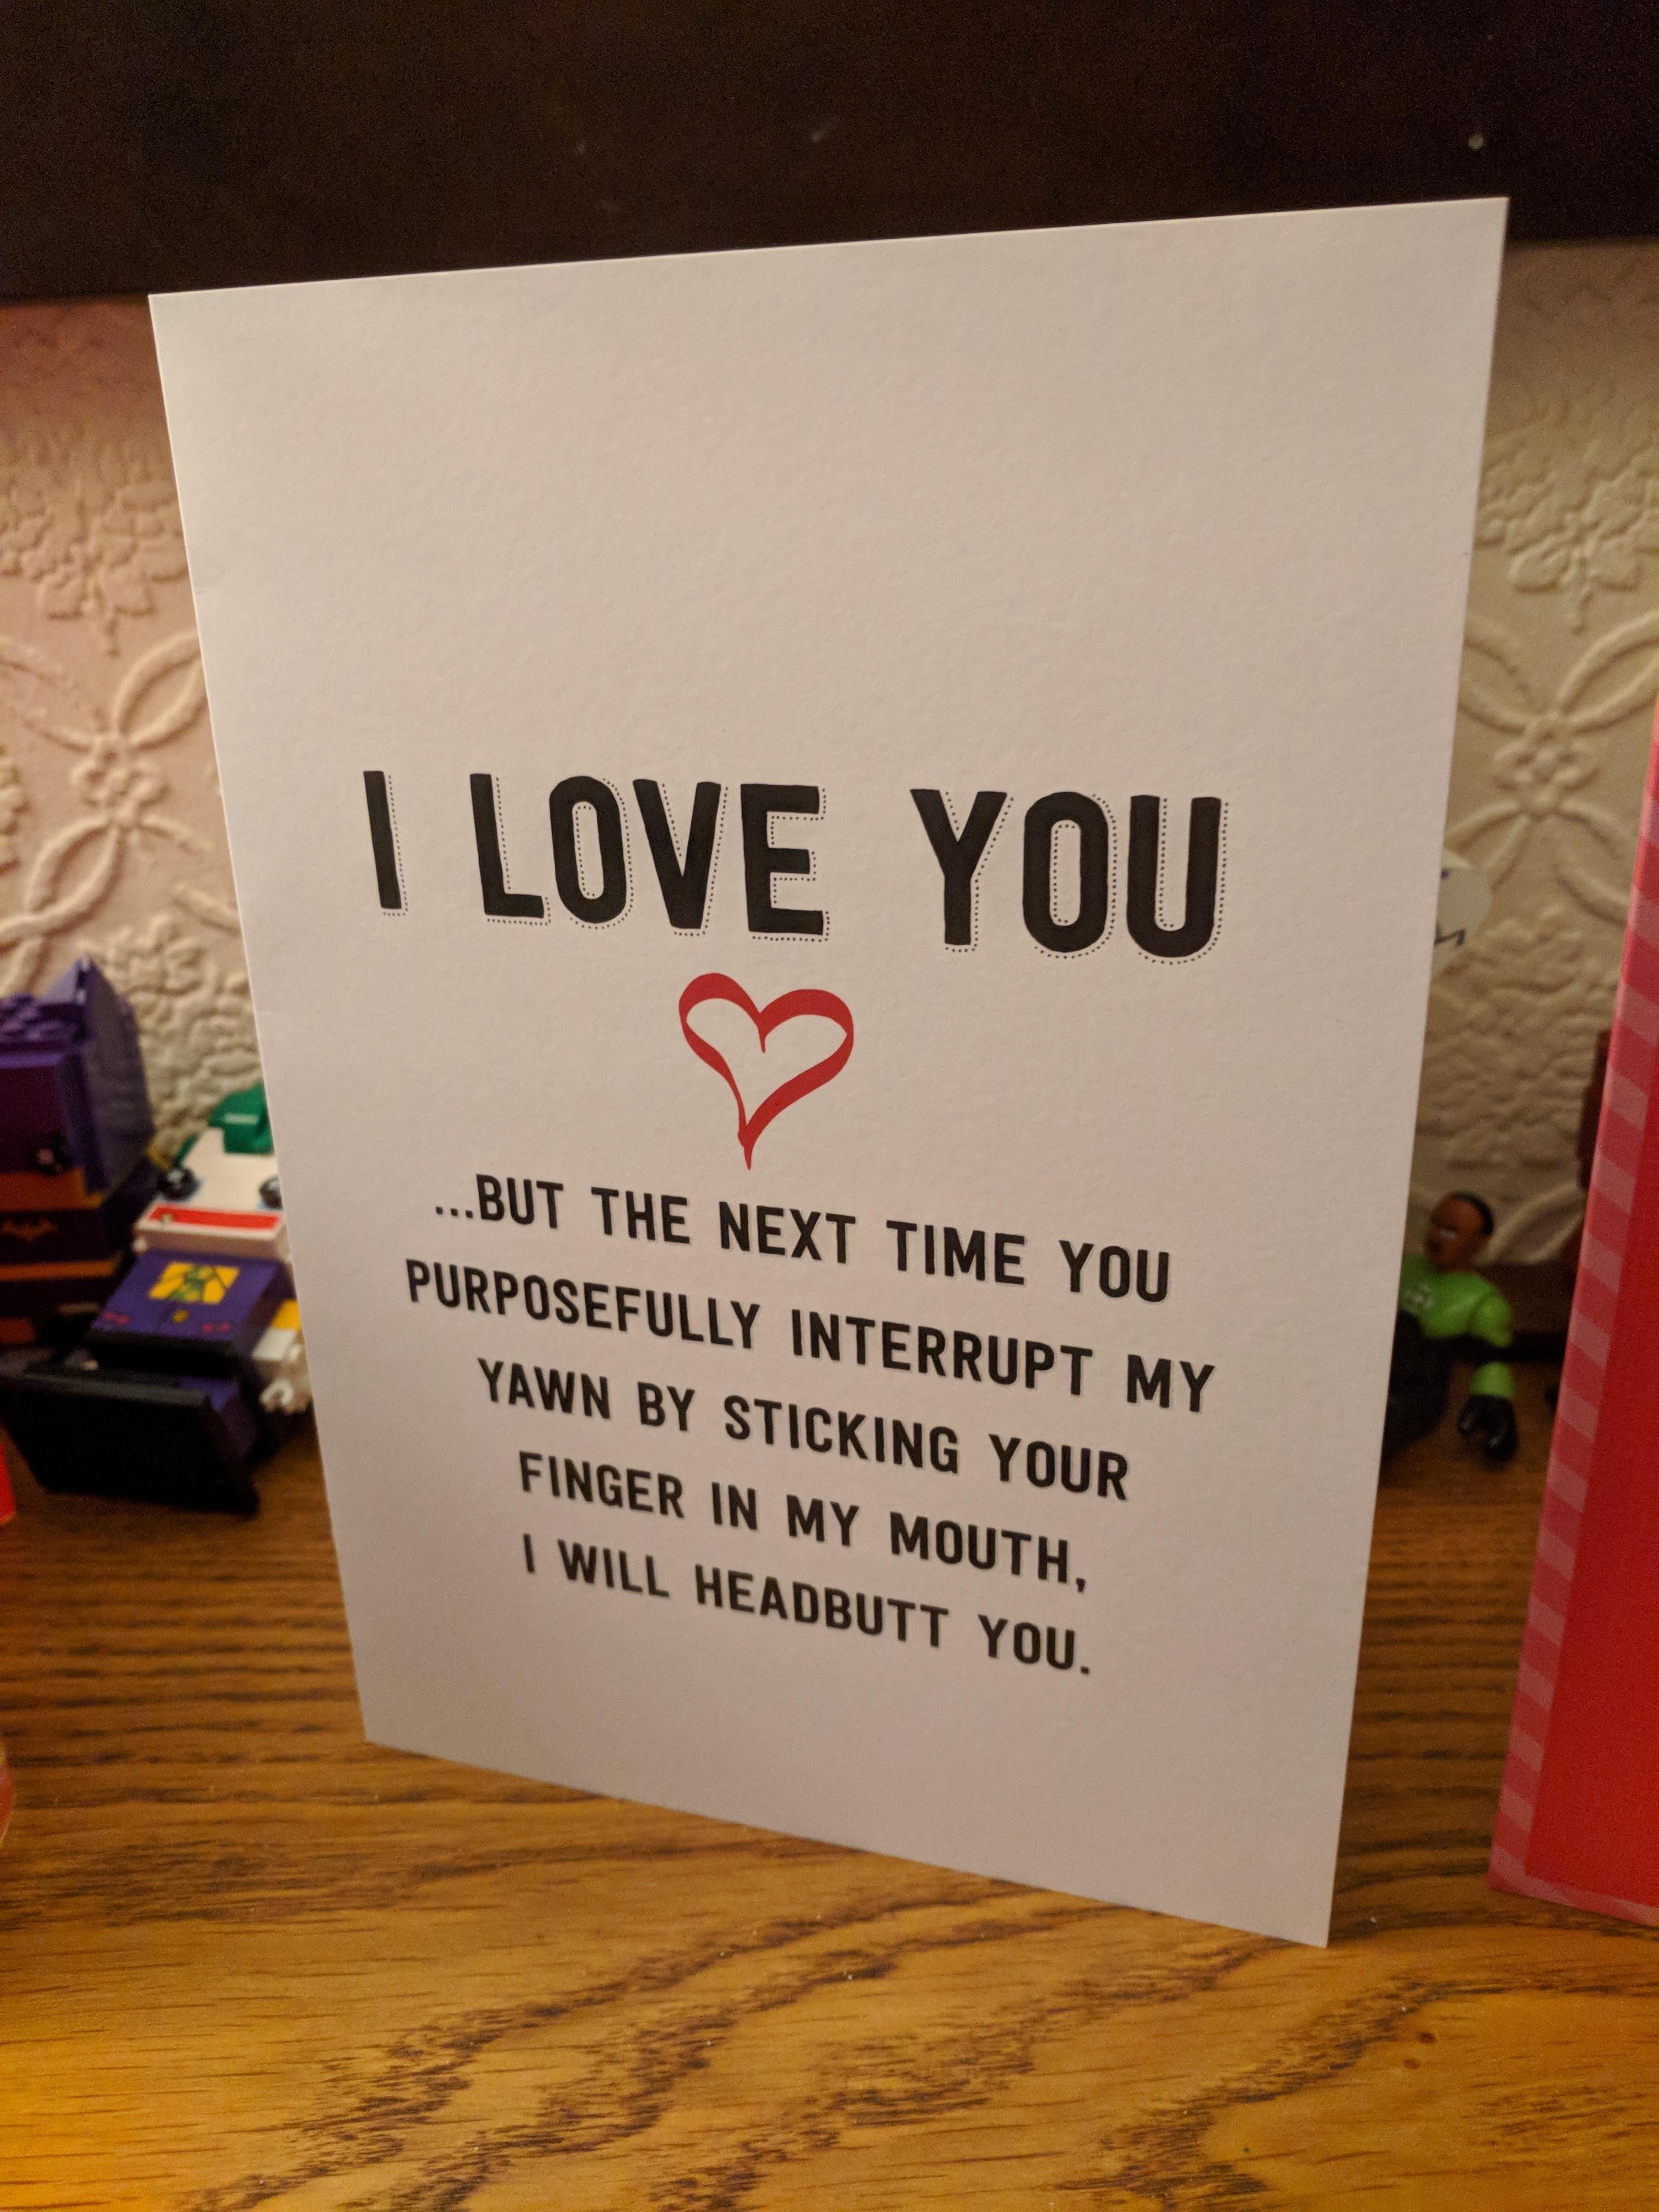 Pretty much sums up my marriage.... The card I received from my wife